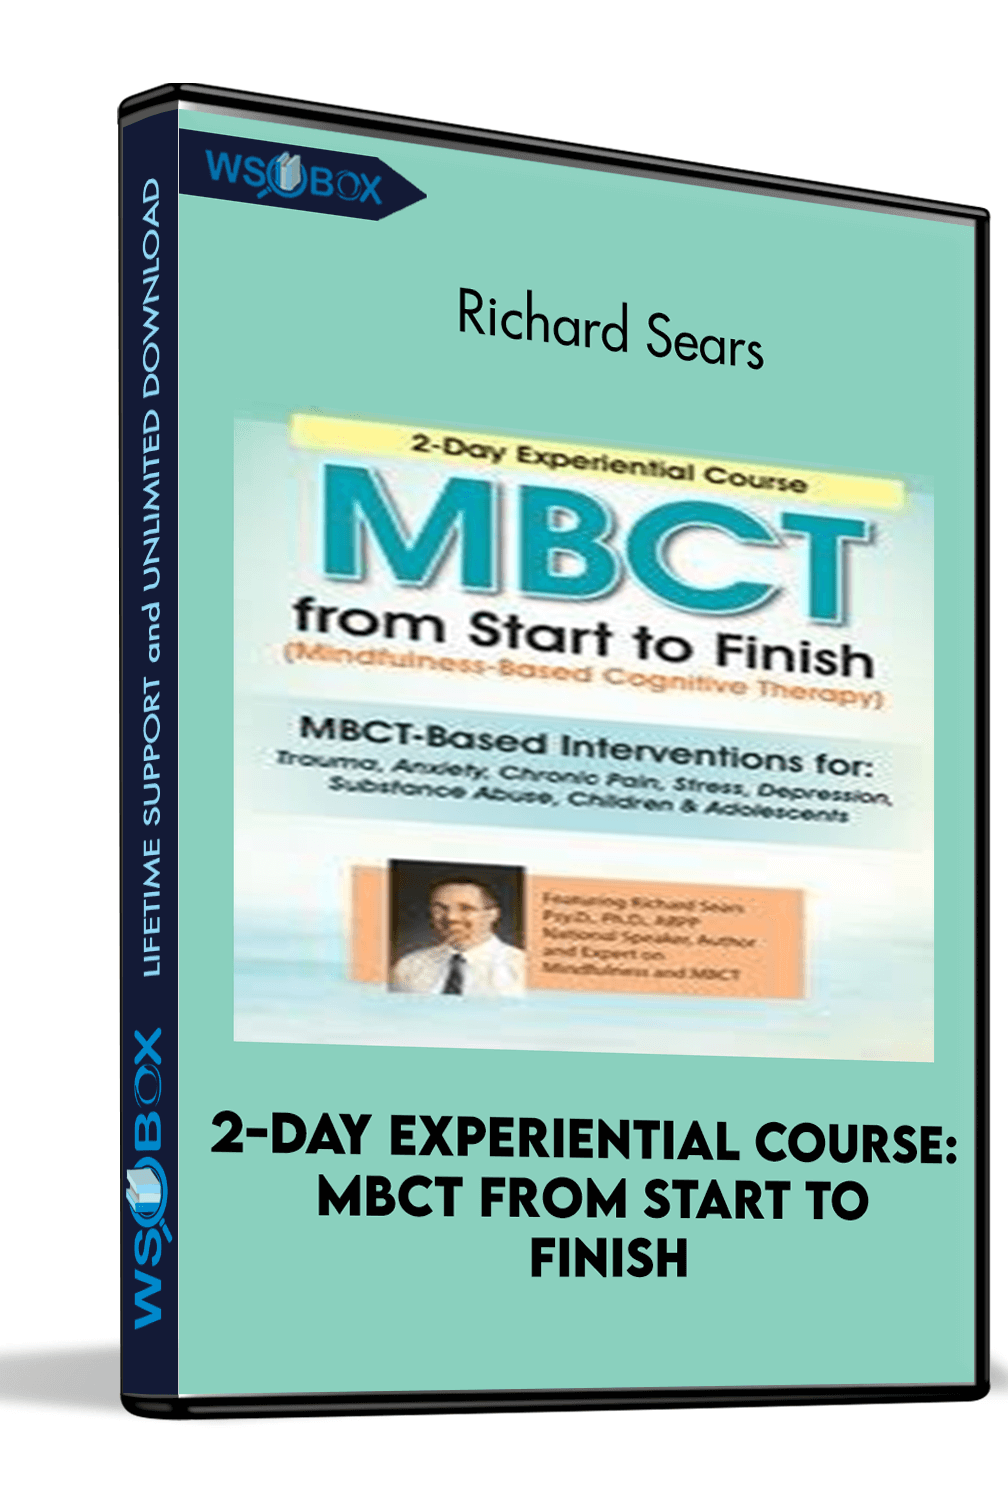 2-Day Experiential Course: MBCT From Start to Finish - Richard Sears